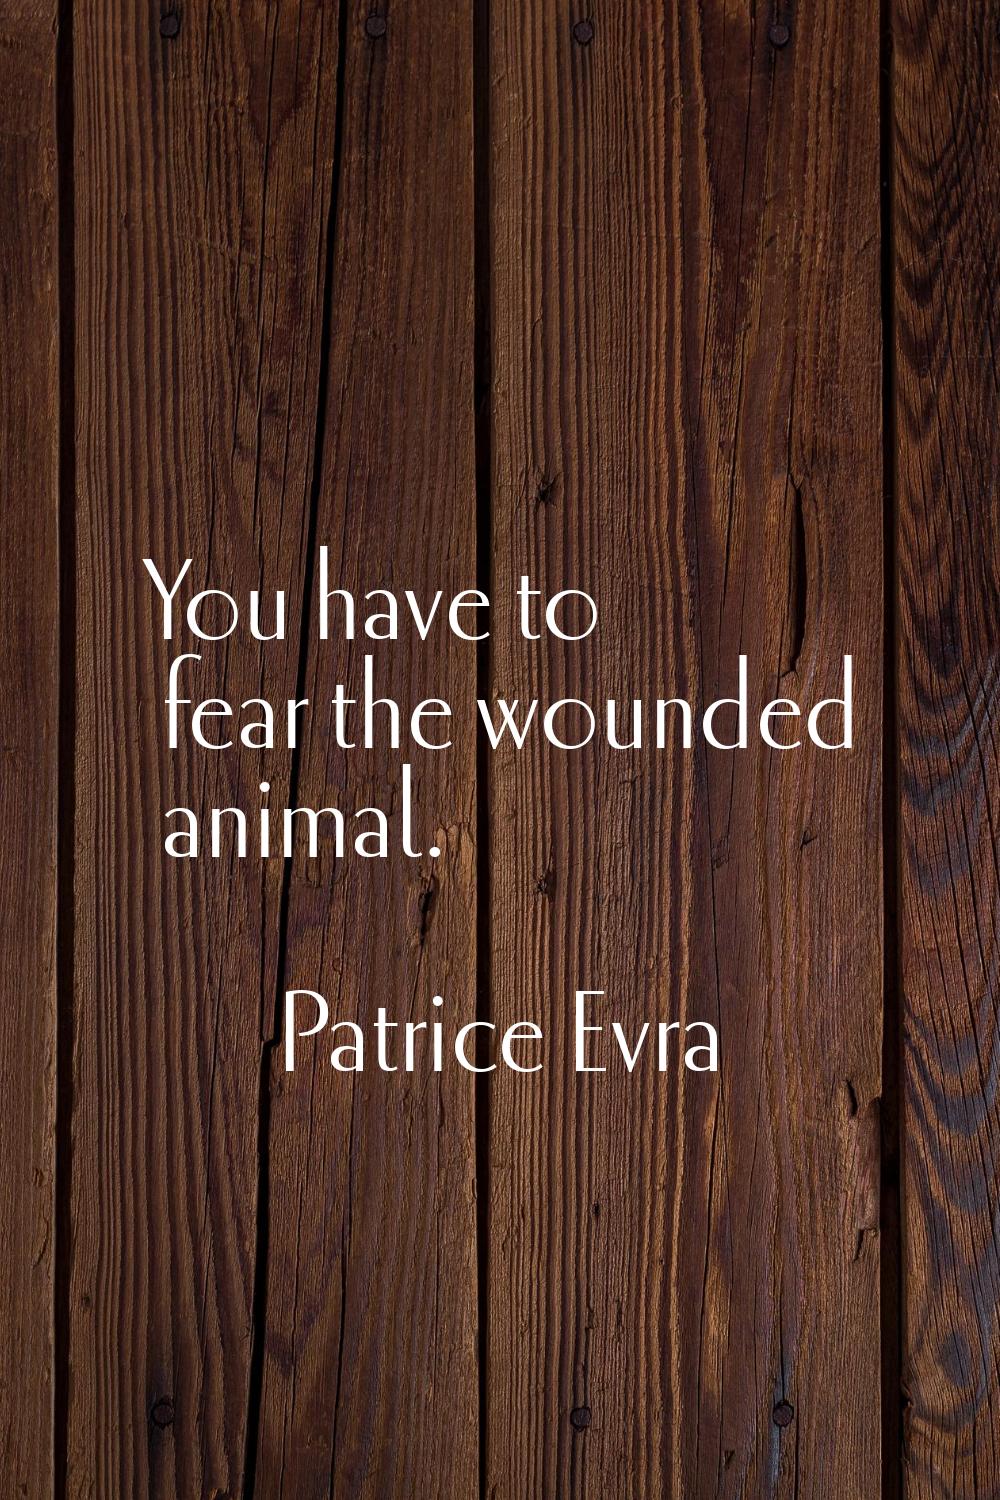 You have to fear the wounded animal.